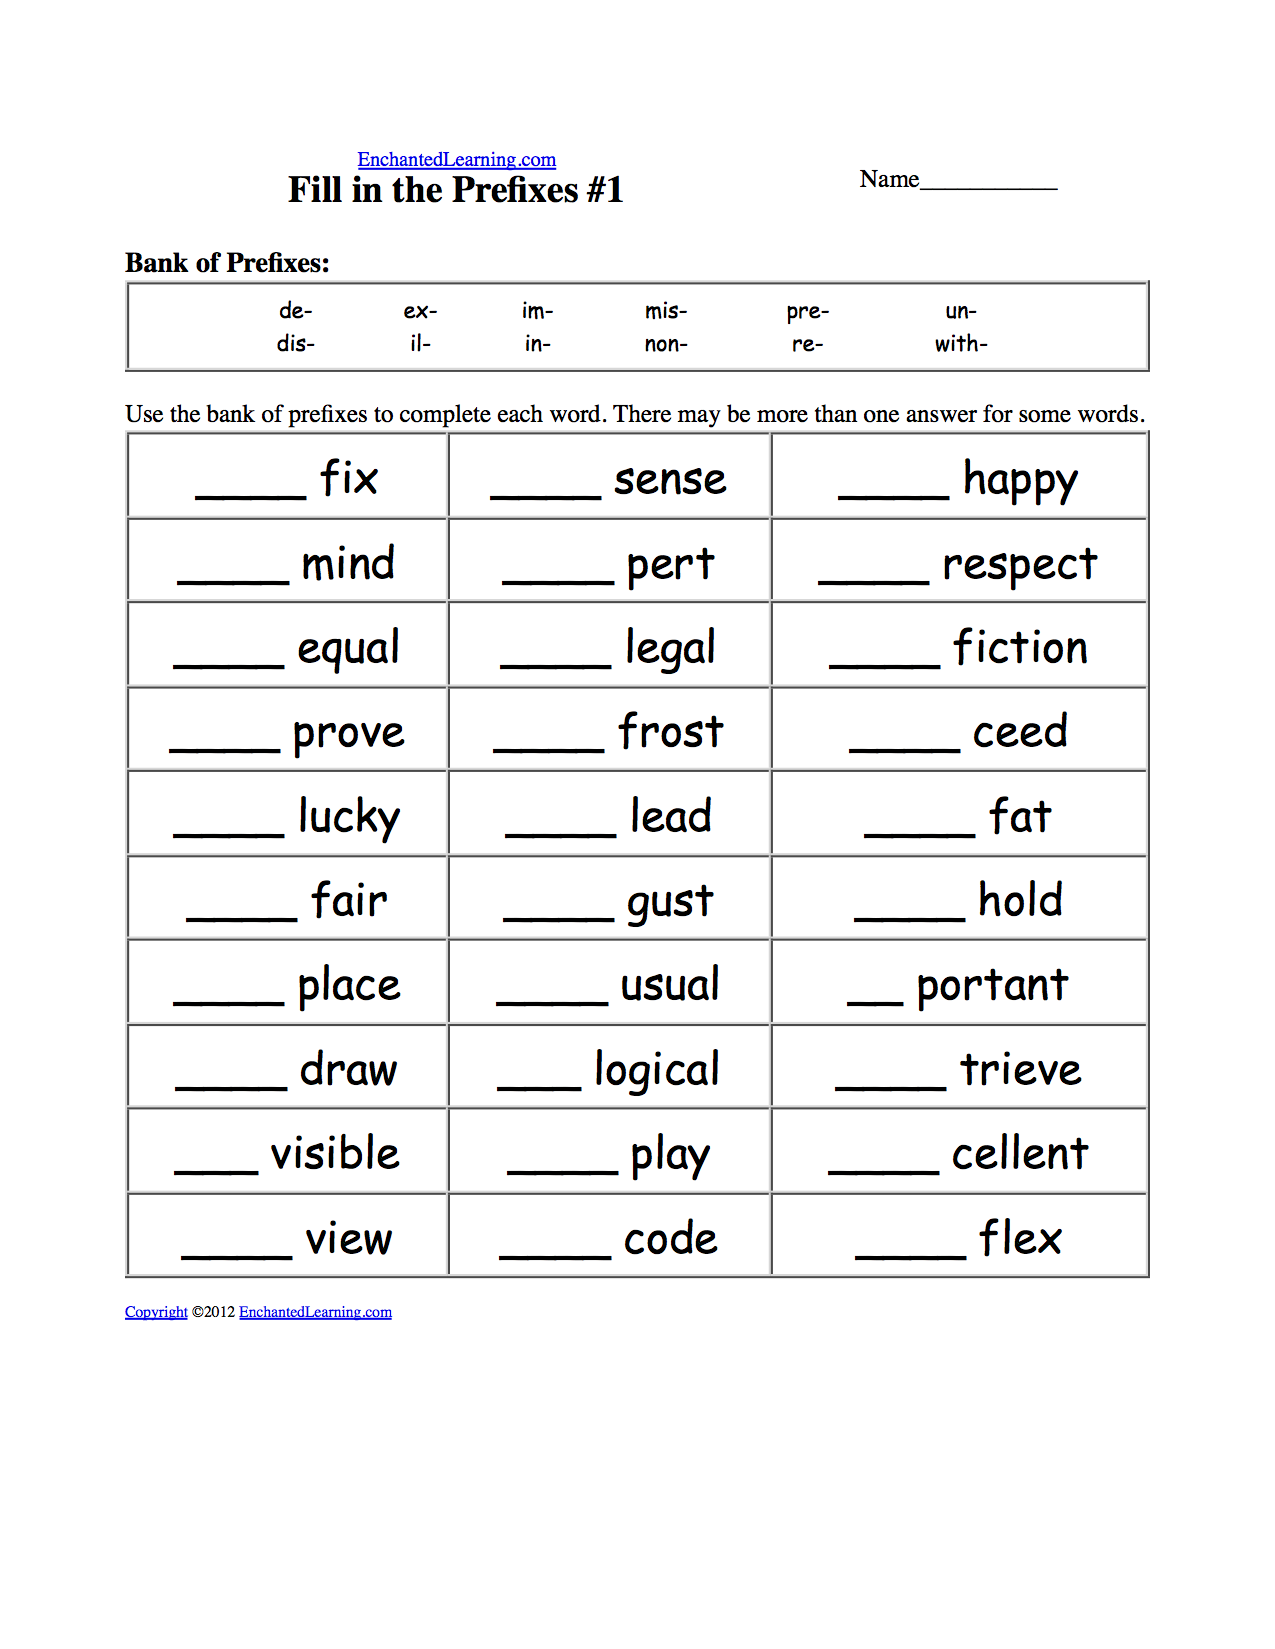 Fill in the Prefixes: Worksheets. EnchantedLearning.com With Prefixes And Suffixes Worksheet